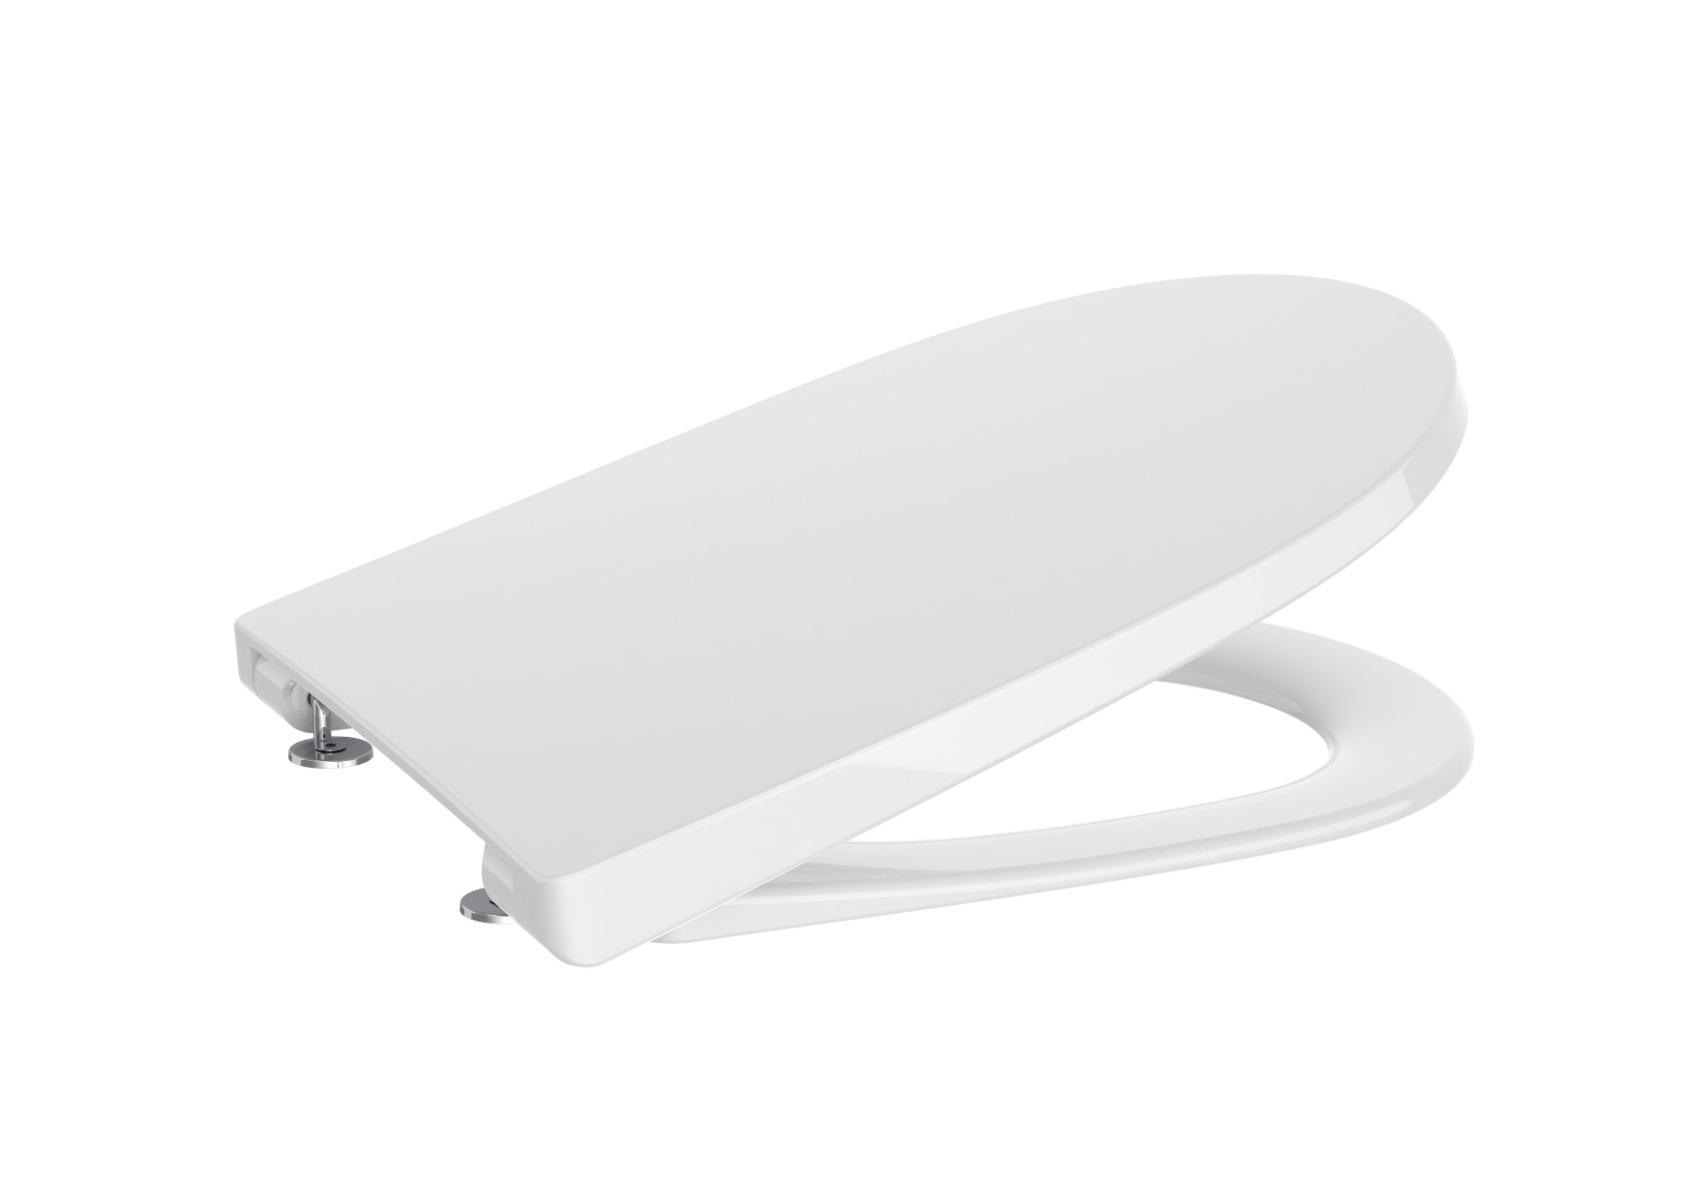 SUPRALIT toilet seat and cover WHITE